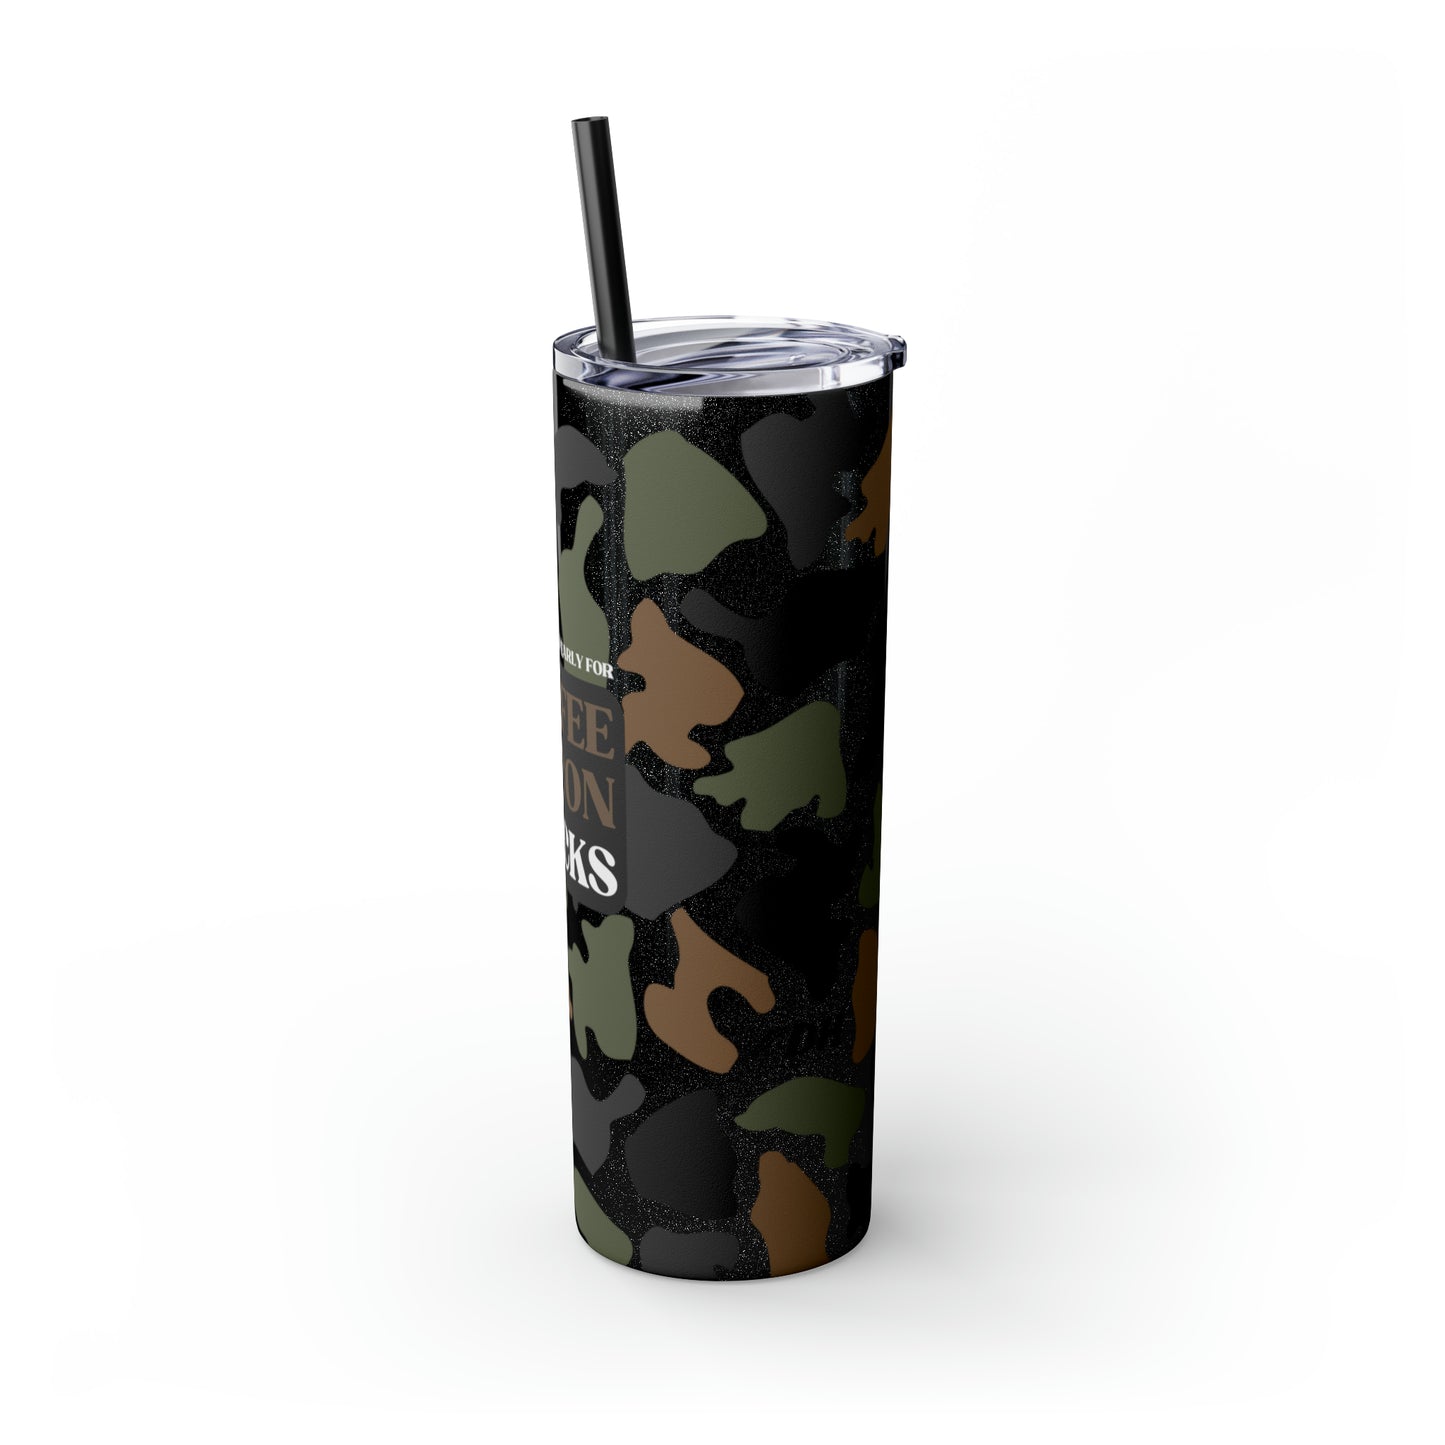 Coffee, Bacon & BUCKS Skinny Tumbler with Straw (Multiple Colors)